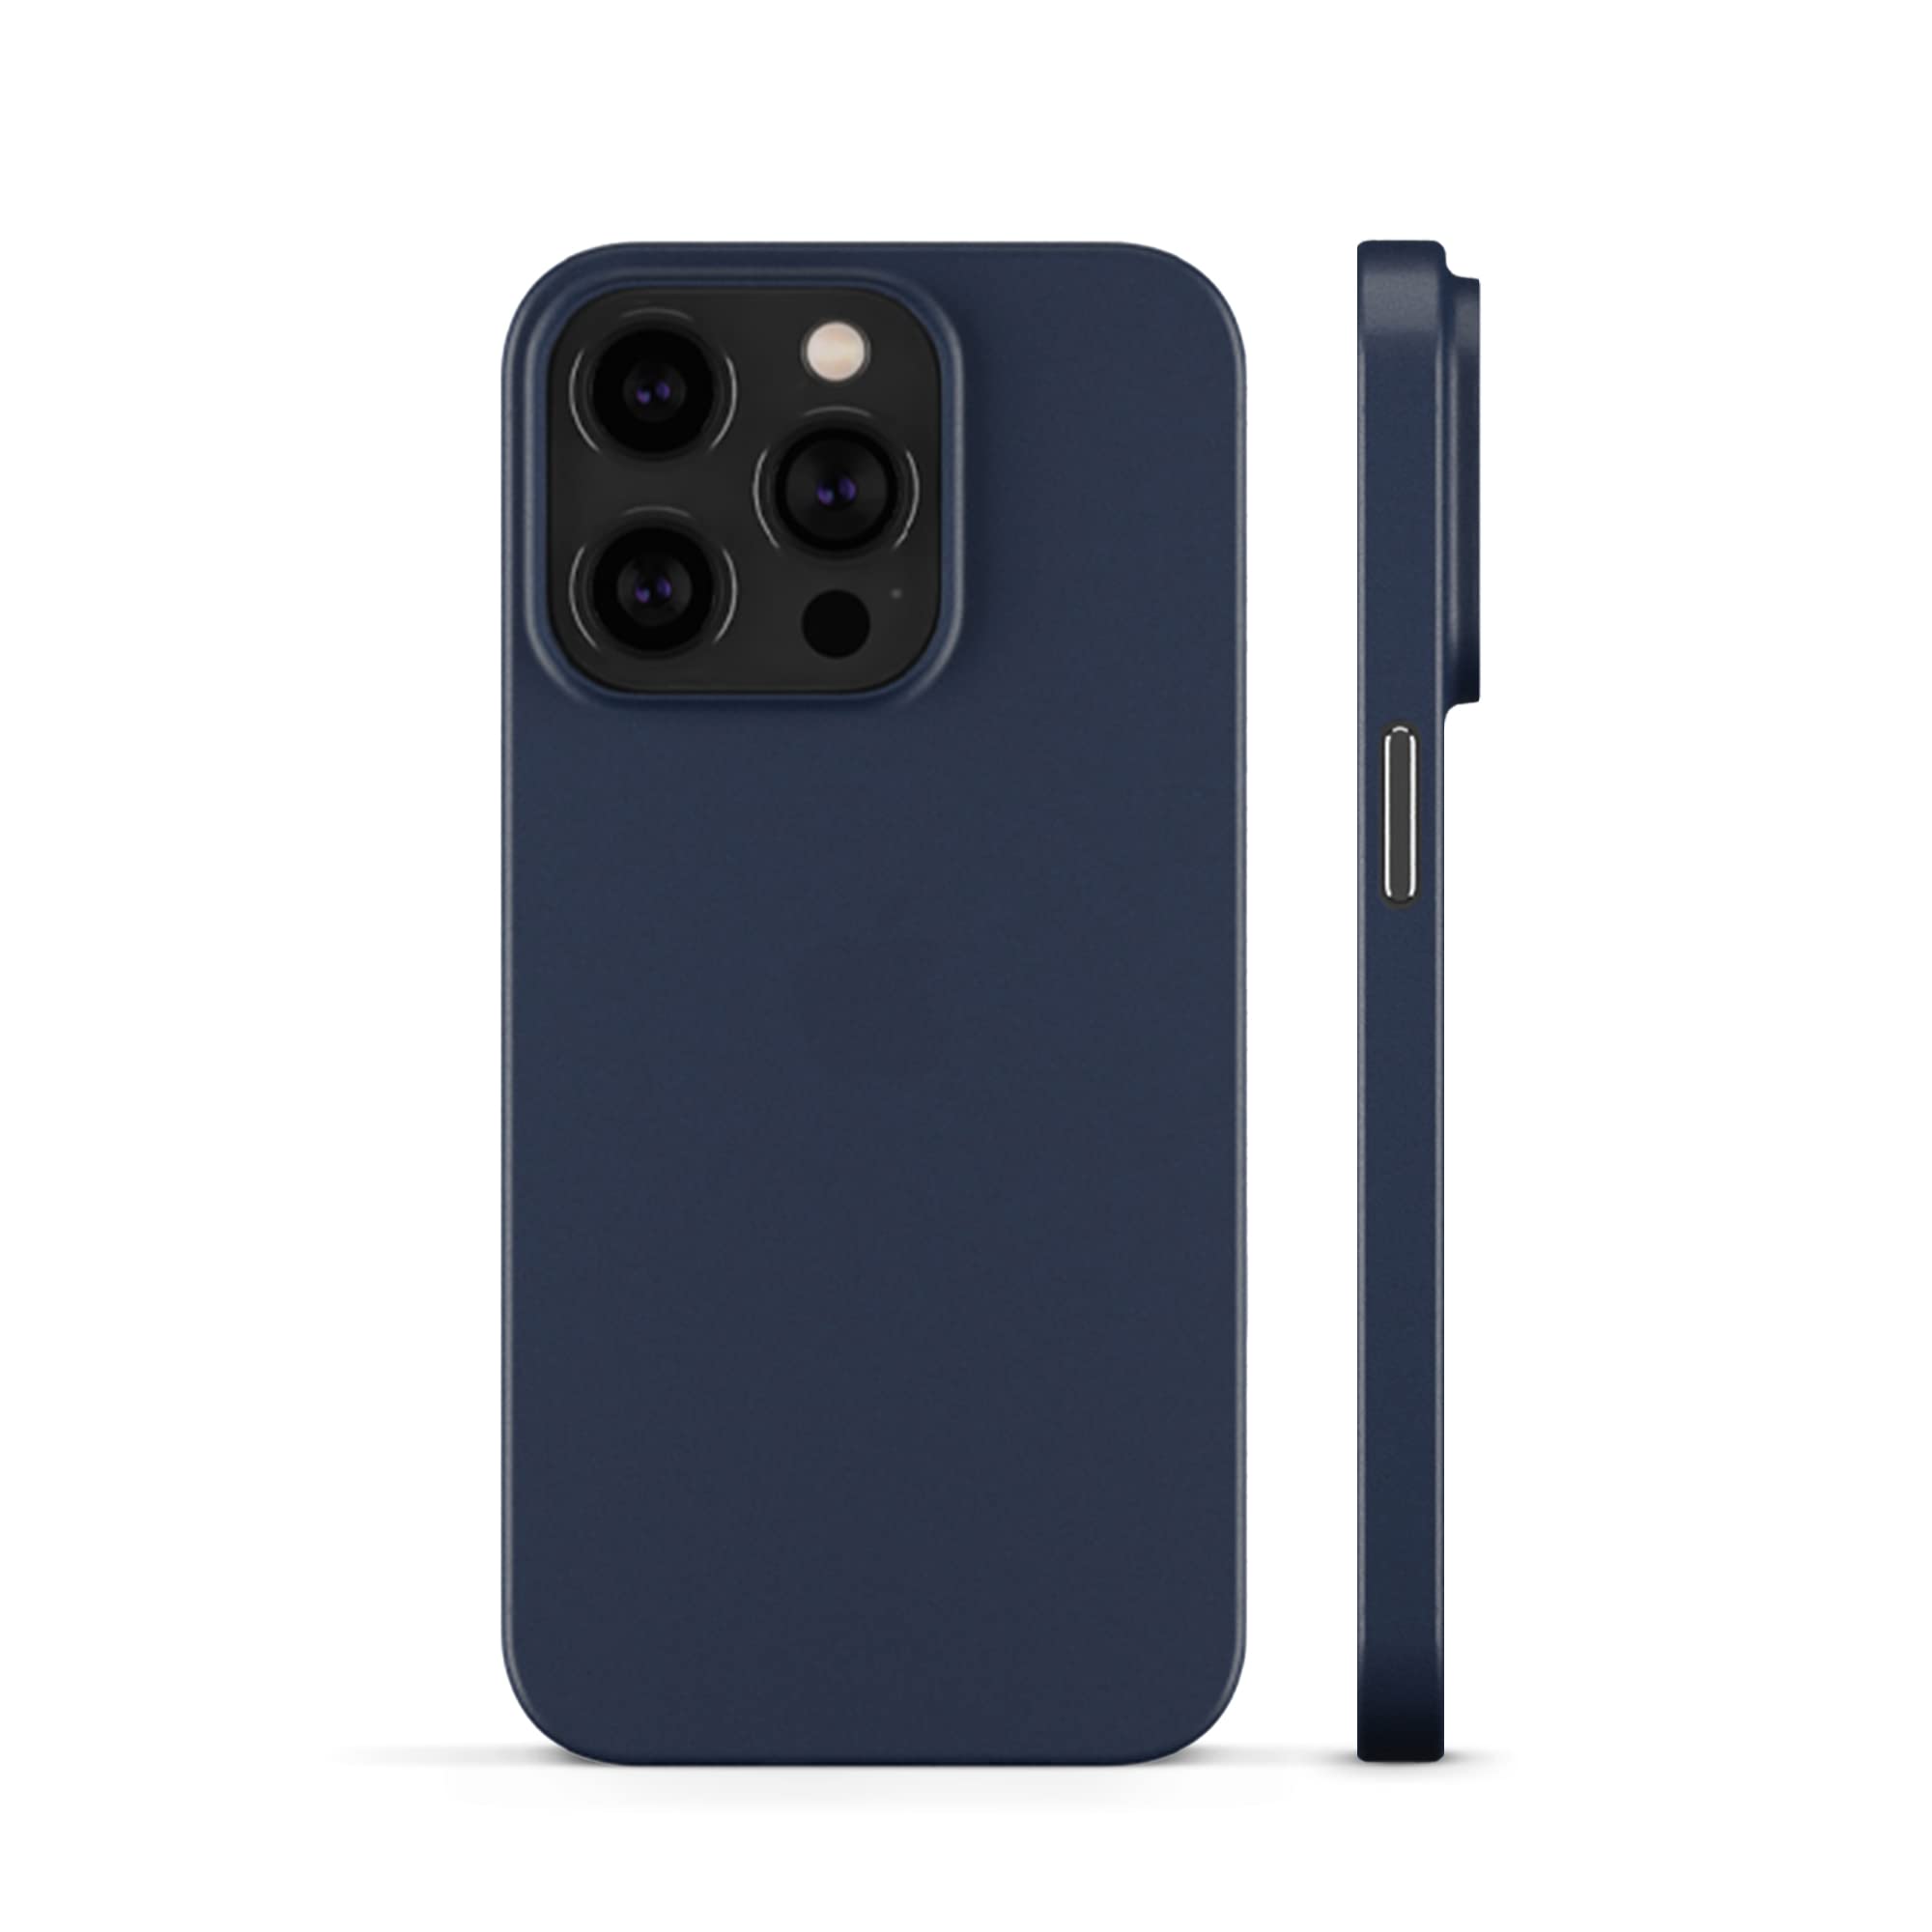 Peel Ultra Thin Iphone 14 Pro Case, Navy - Minimalist Design Branding Free Protects And Showcases Your Apple Iphone 14 Pro